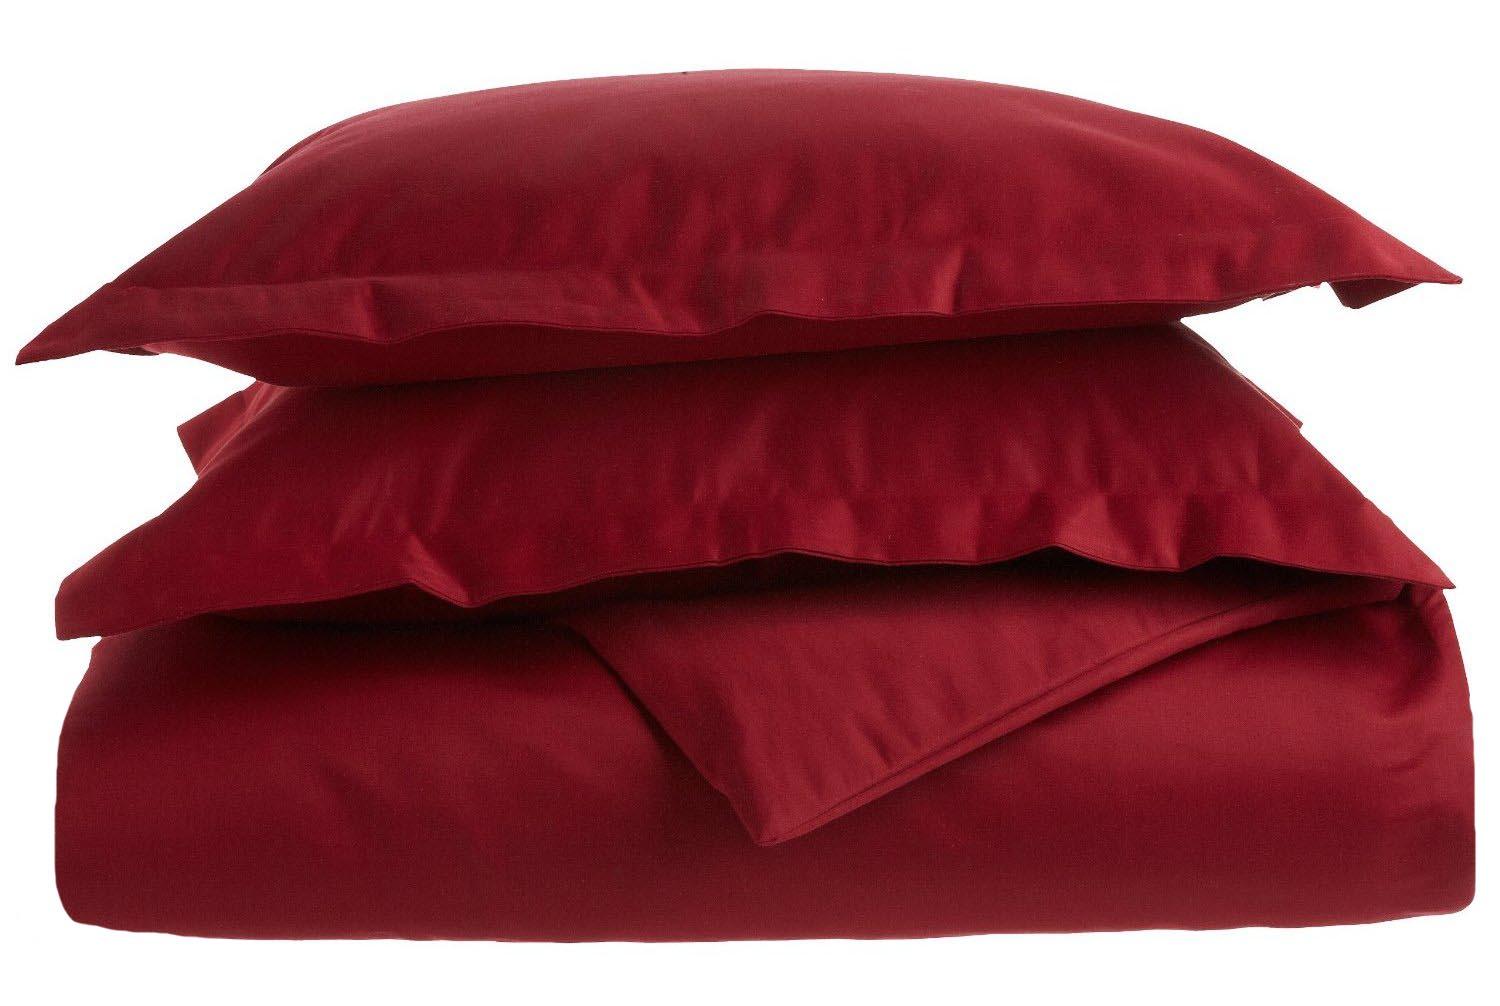 Superior Solid 1500-Thread Count Ultra-Soft Cotton Marrow Stitch Duvet Cover Set - Burgundy